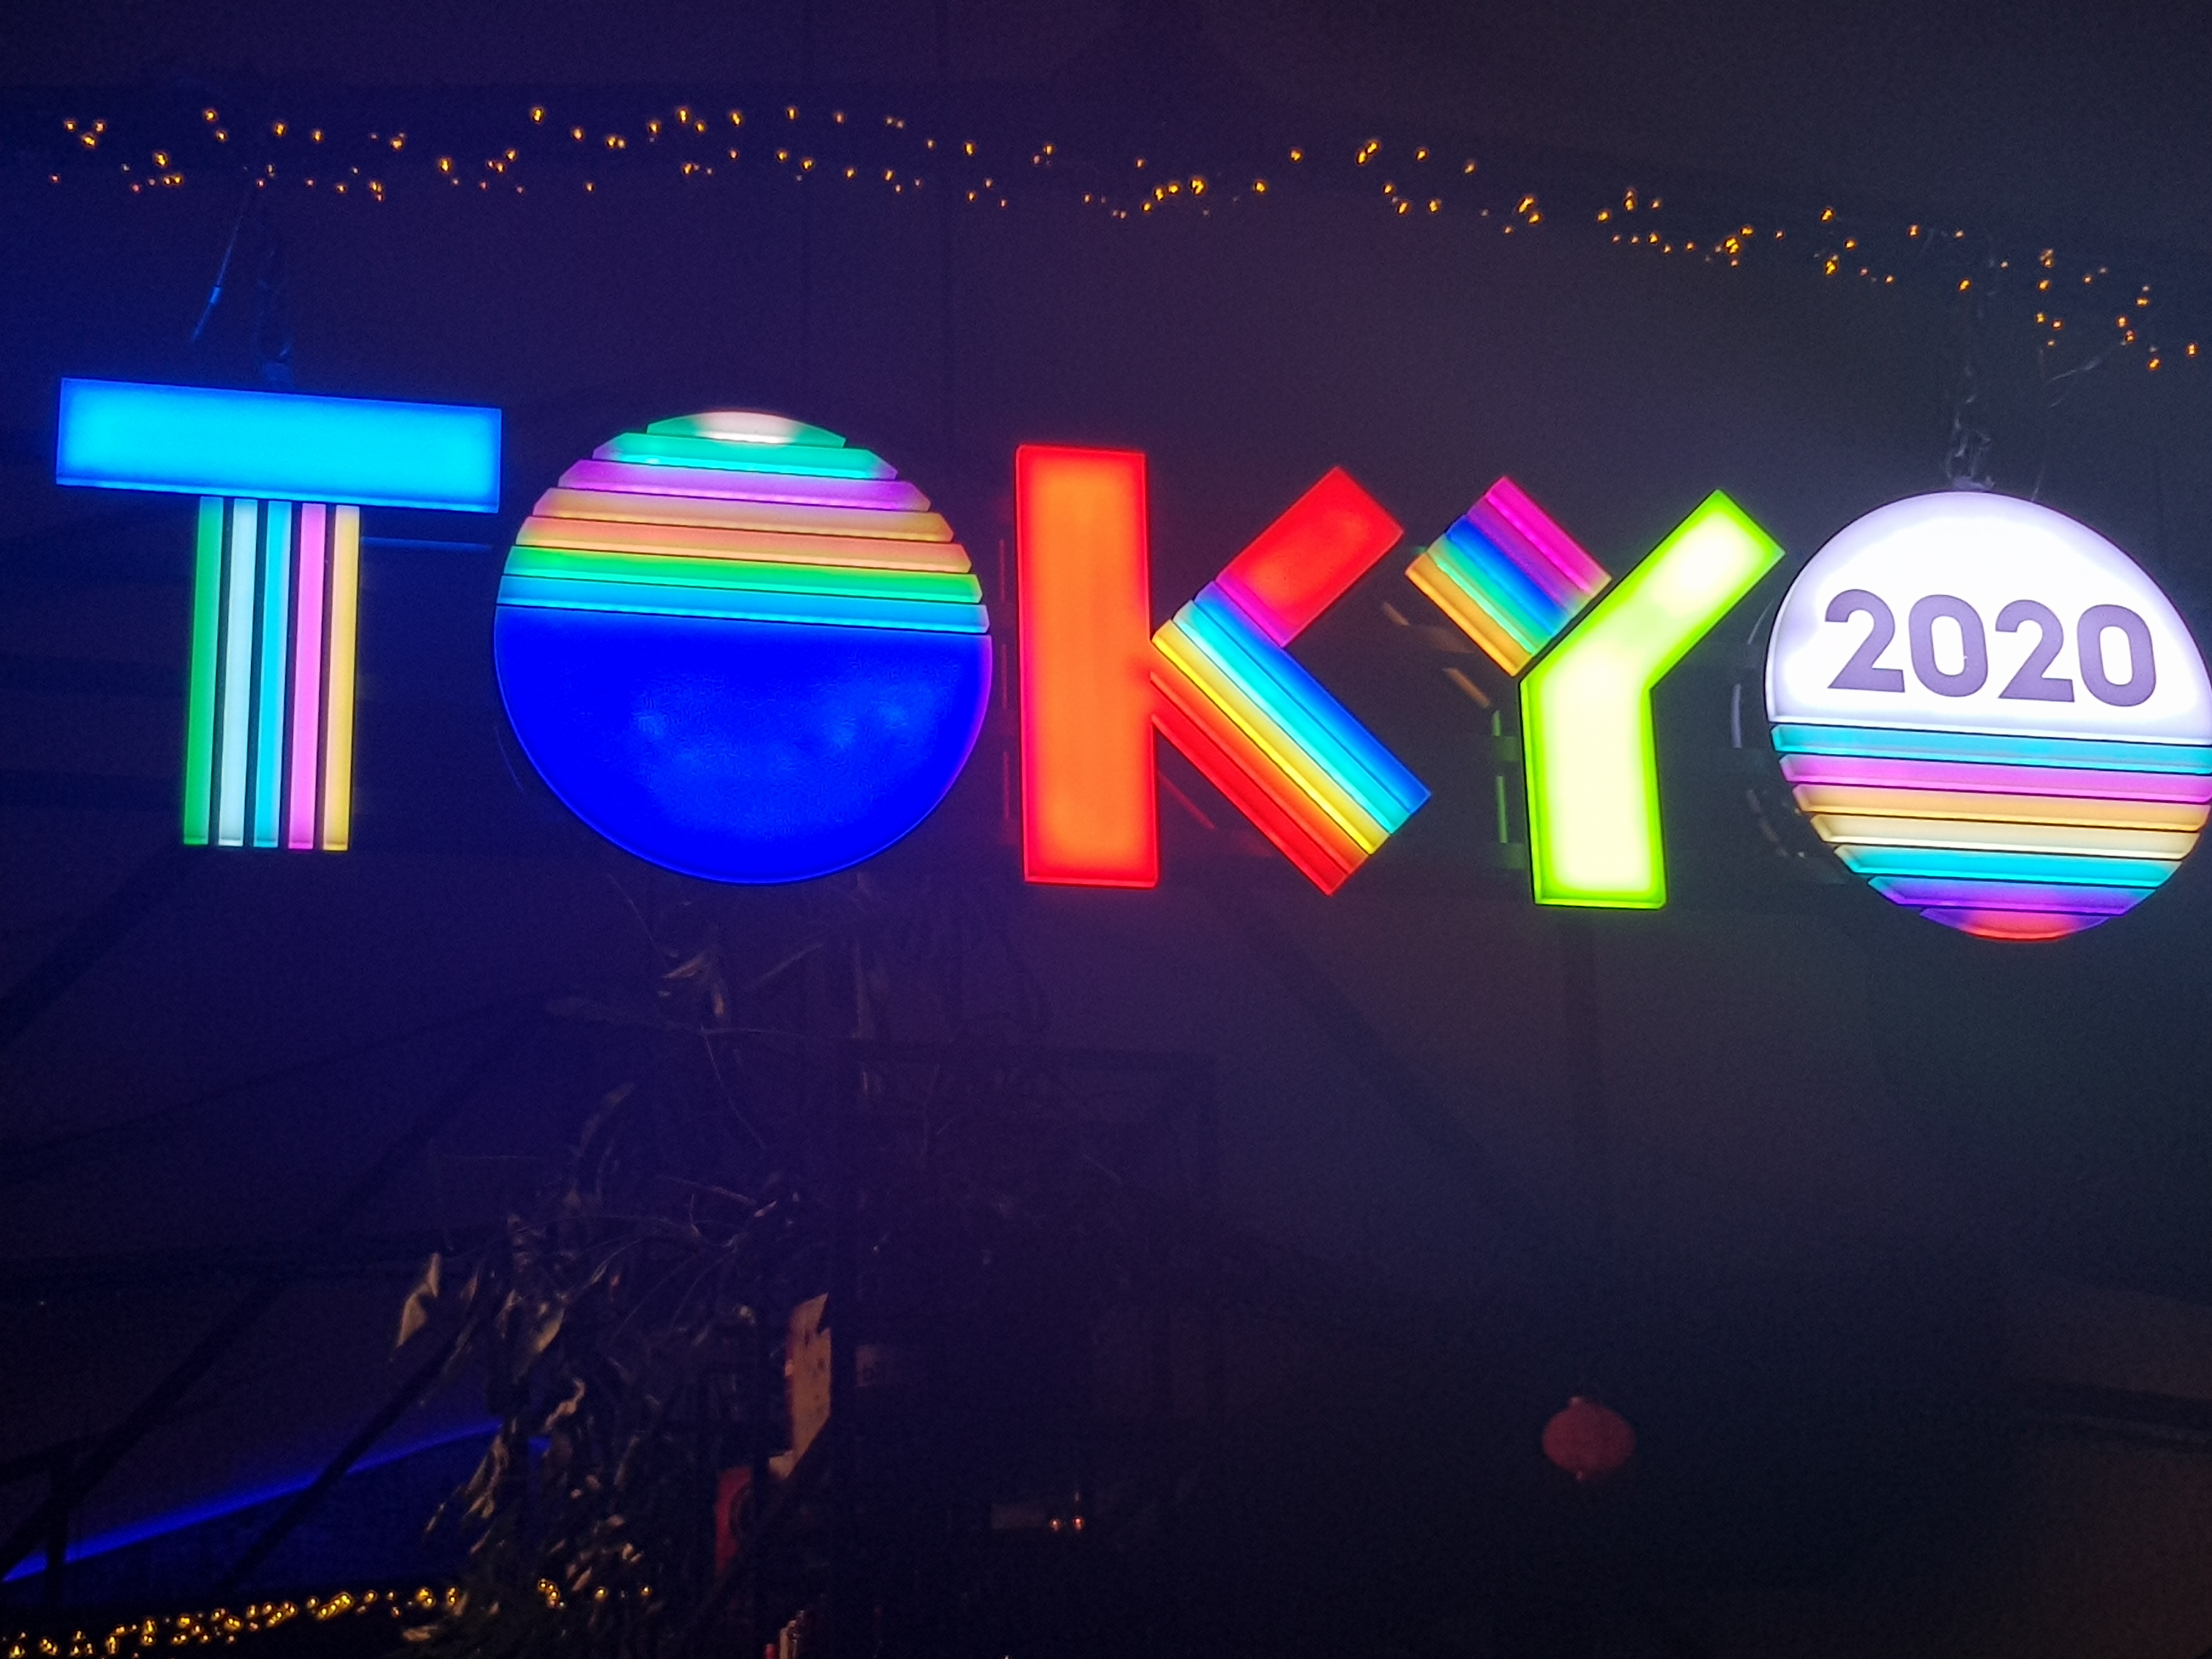 Seven working closely with partners on solutions as Tokyo 2020 Olympics postponed